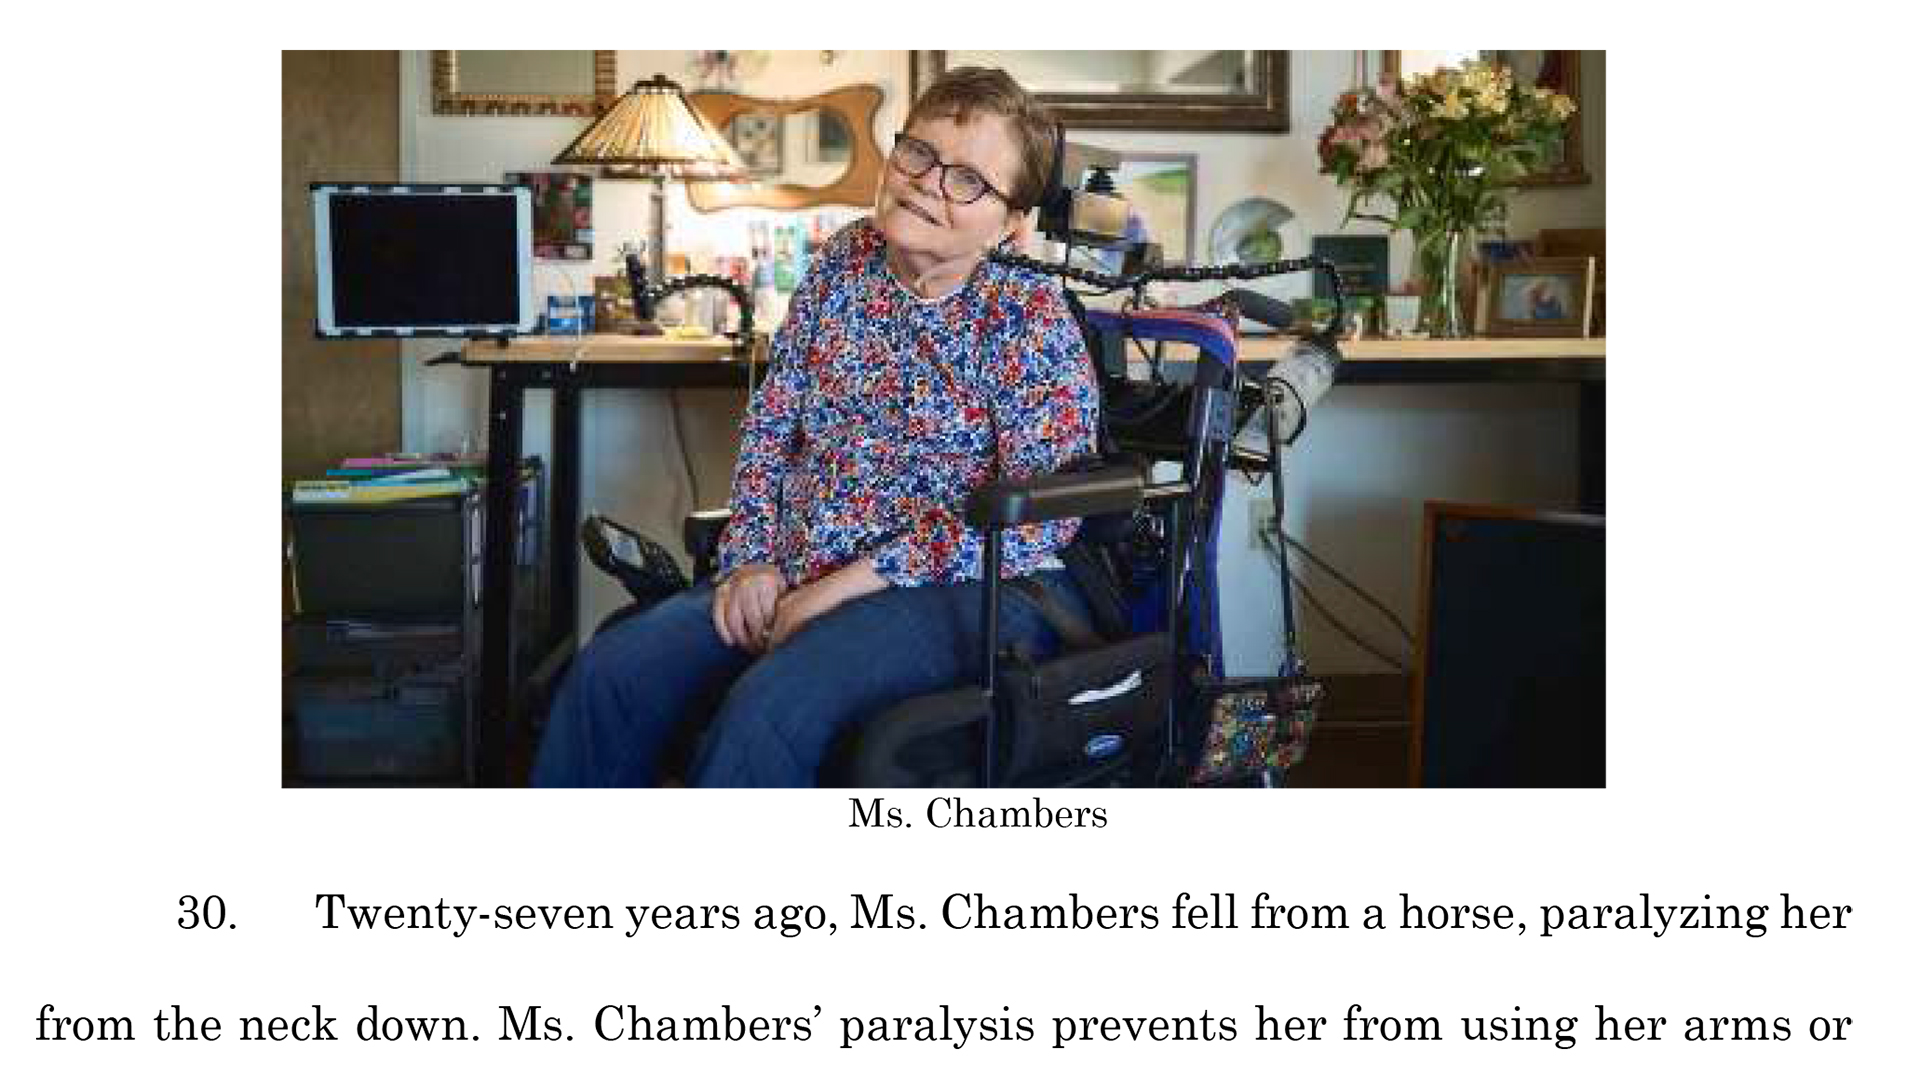 A screenshot from a lawsuit shows a photo of Martha Chambers with the caption "Ms. Chambers" and followed by a truncated line that reads, "30. Twenty-seven years ago, Ms. Chambers fell from a horse, paralyzing her from the next down. Ms. Chambers' paralysis prevents her from using her arms or..."